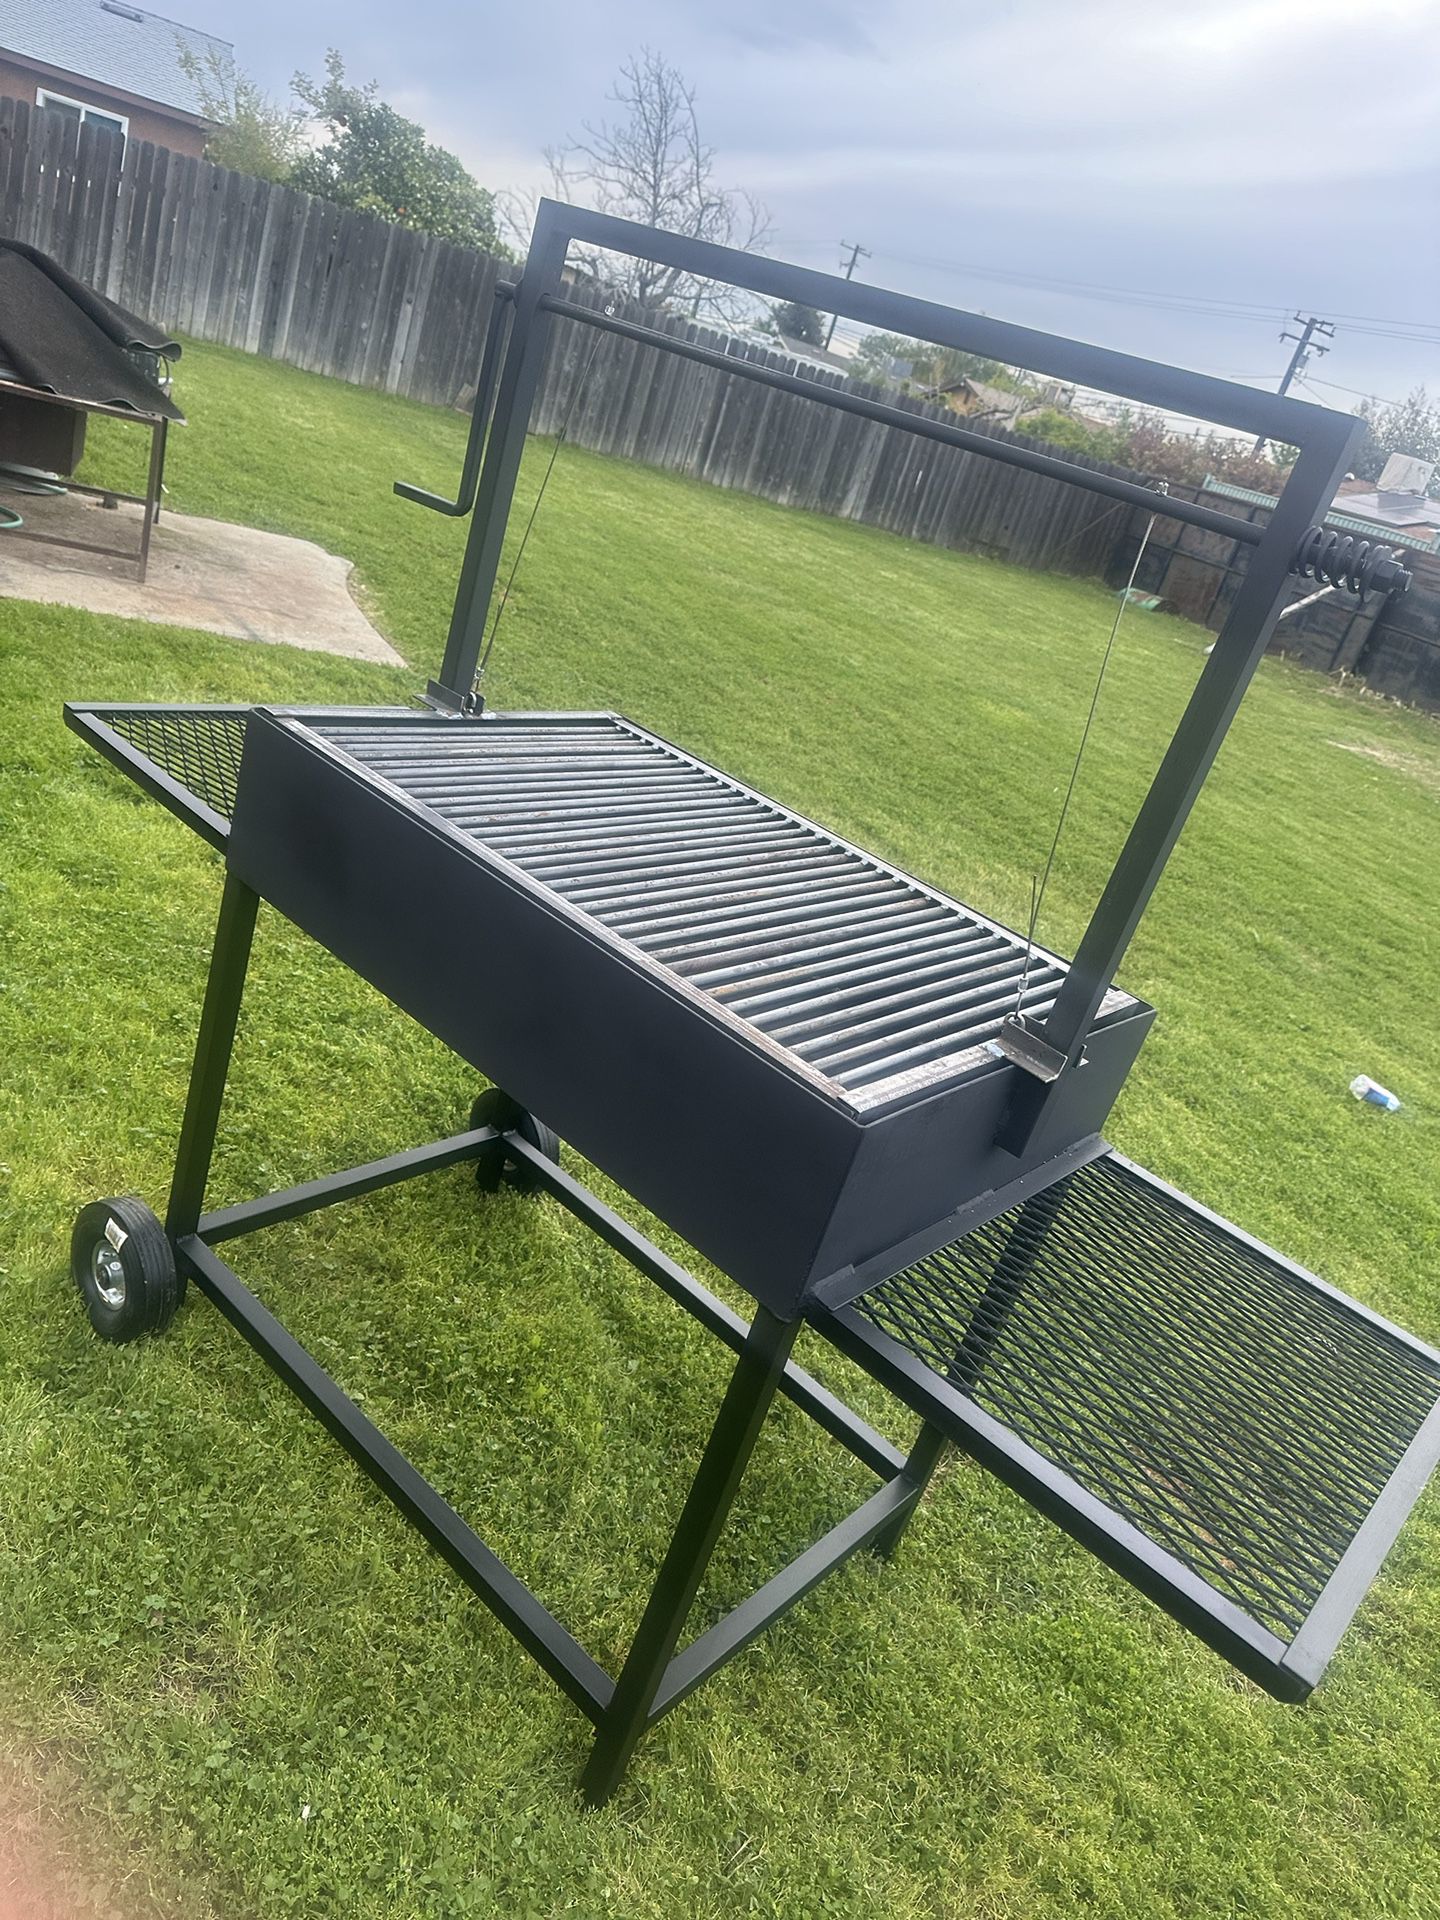 Heavy Duty Bbq Grill 💯💯🔥🔥Made To last 